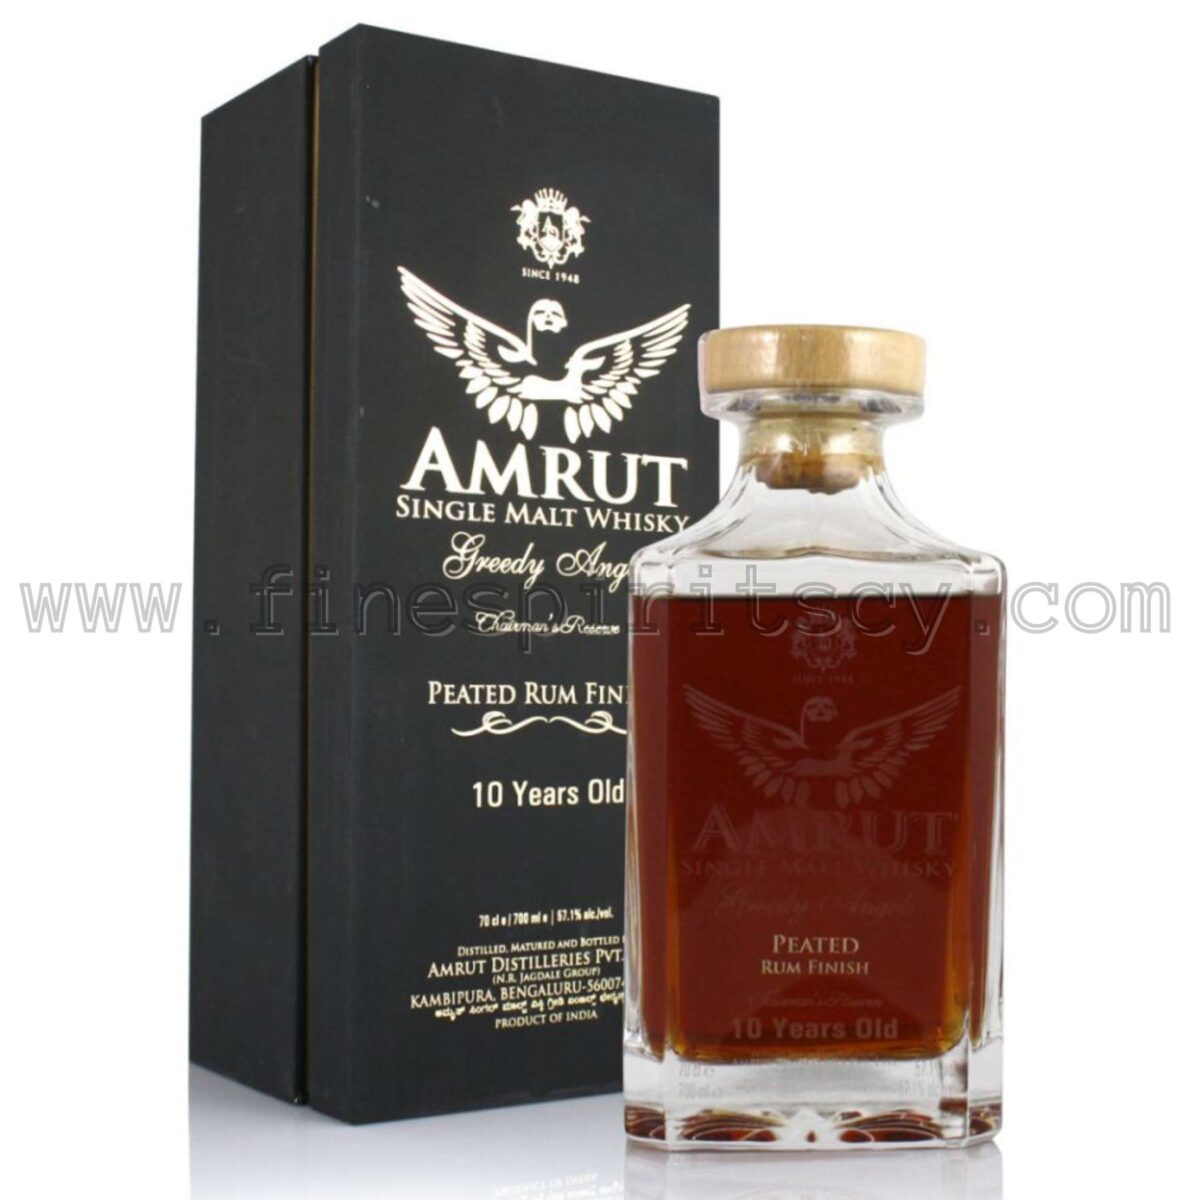 Amrut Greedy Angels Chairman's Reserve Peated Rum Finish 10 Year Old Cyprus Price